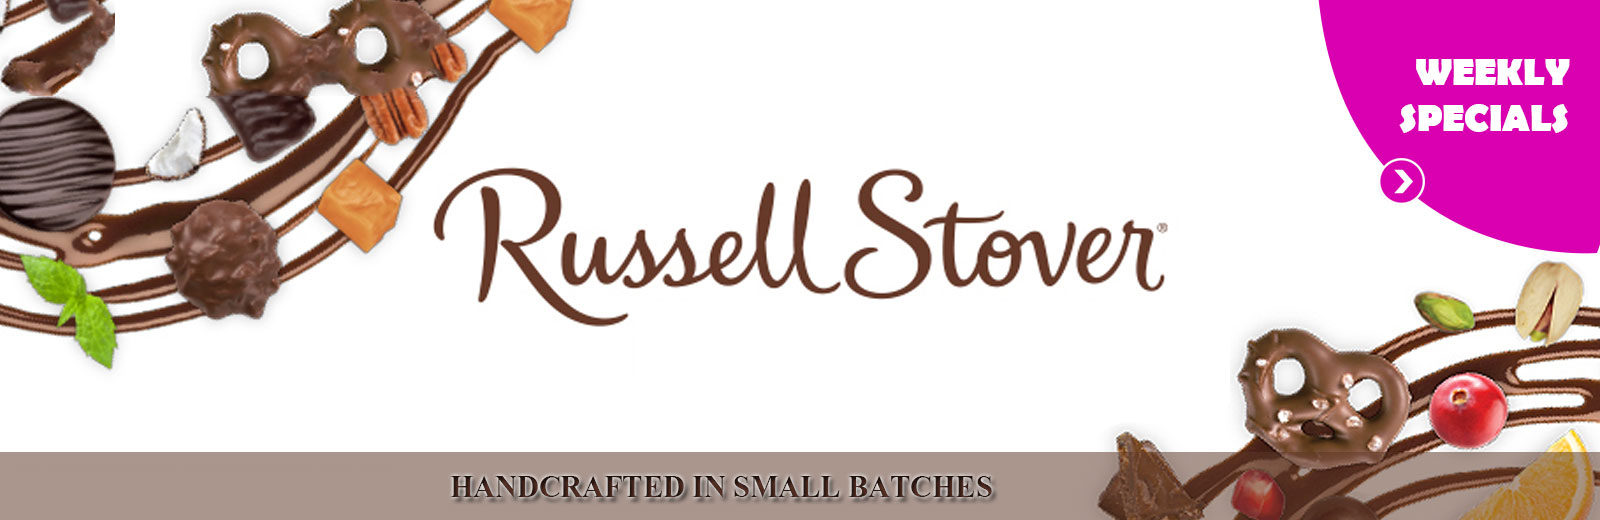 RussellStover